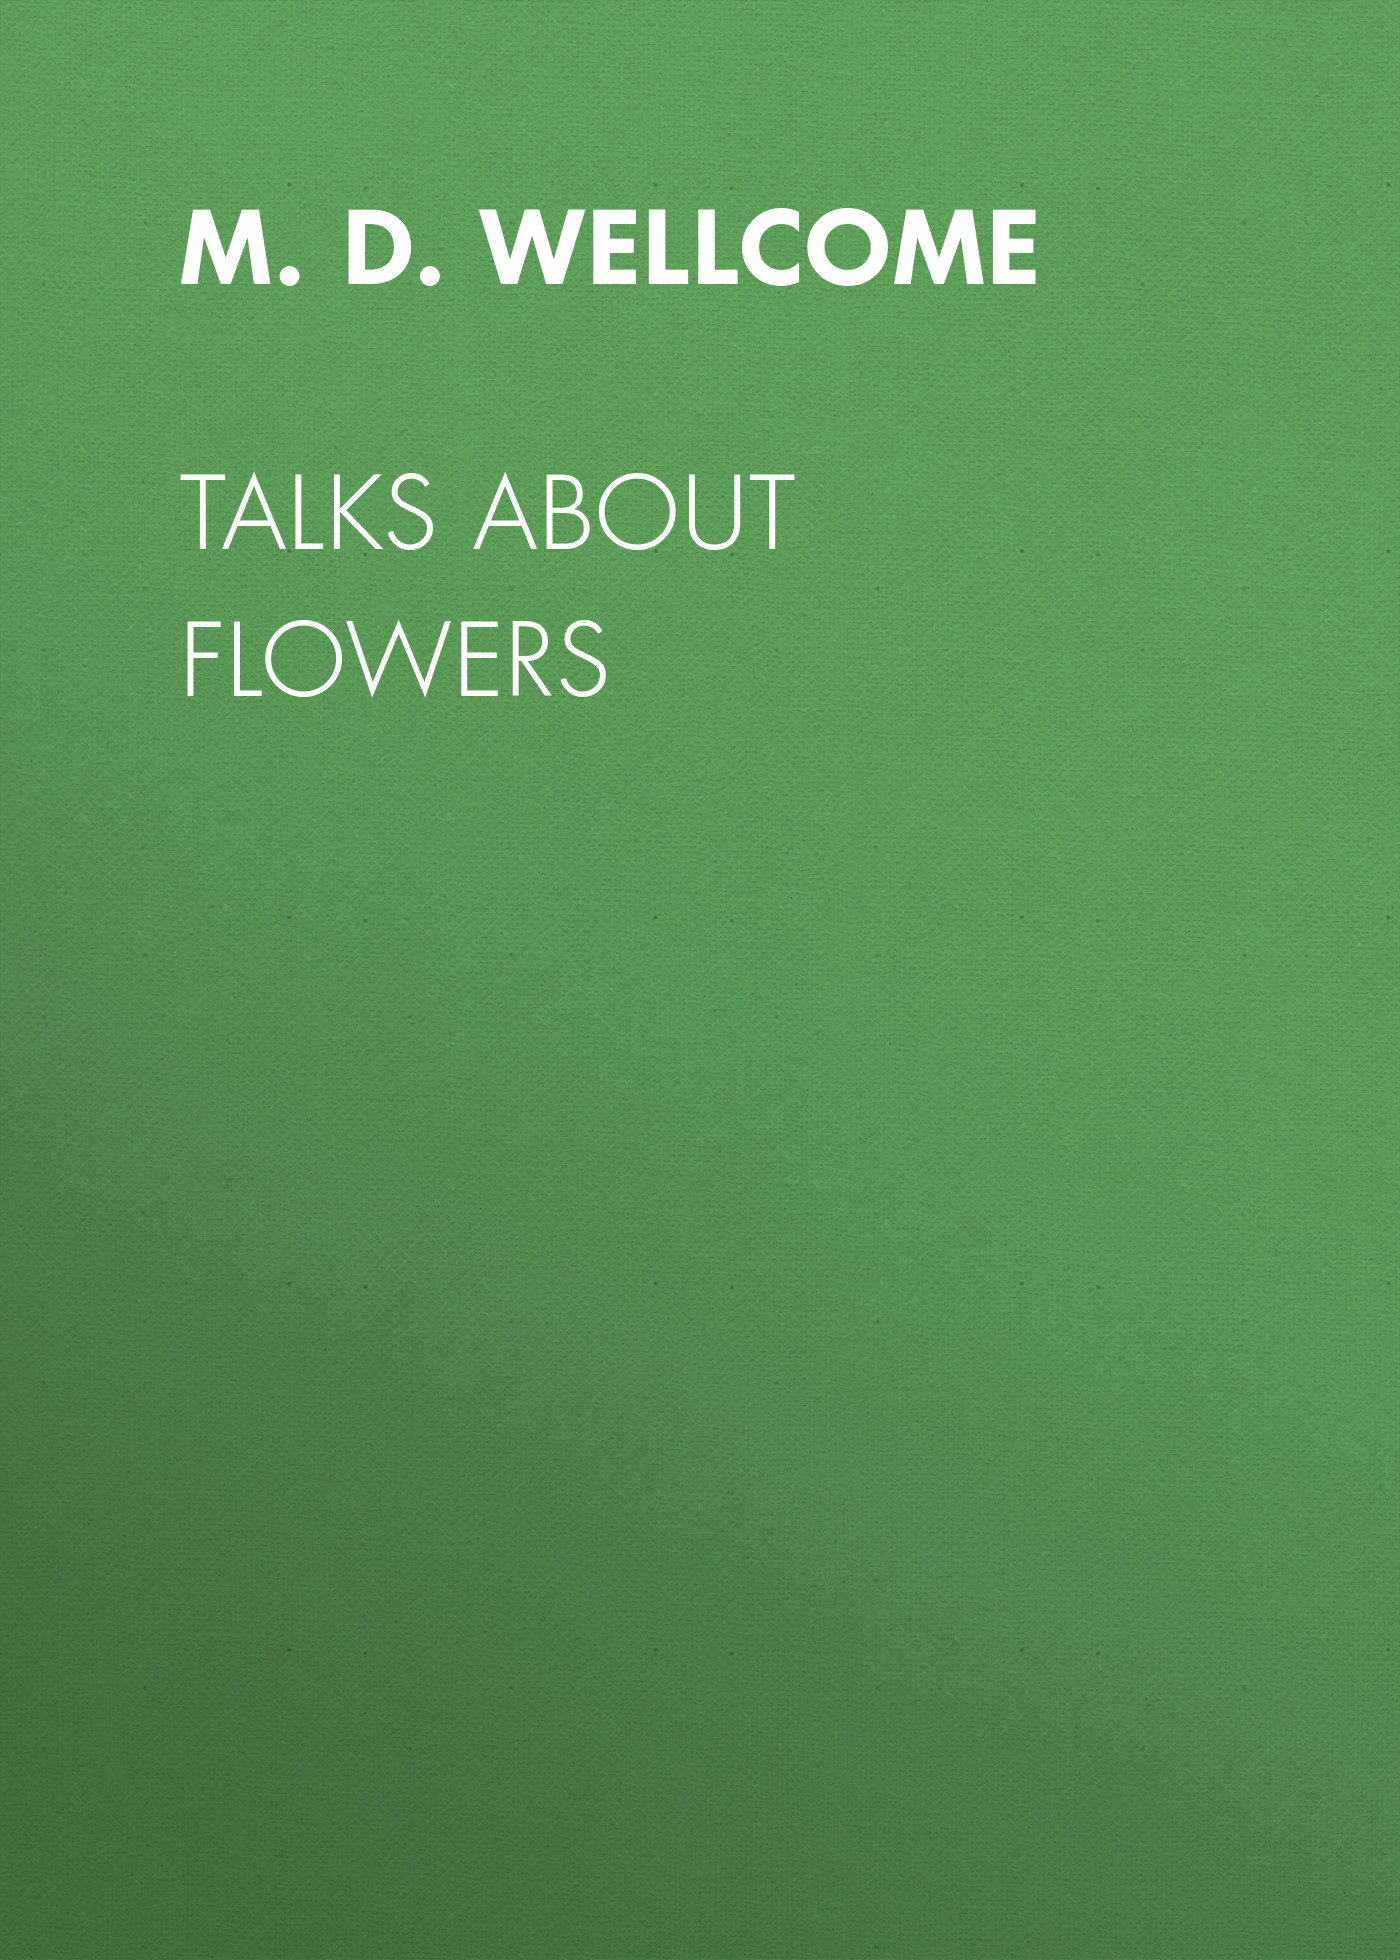 M. D. Wellcome Talks About Flowers